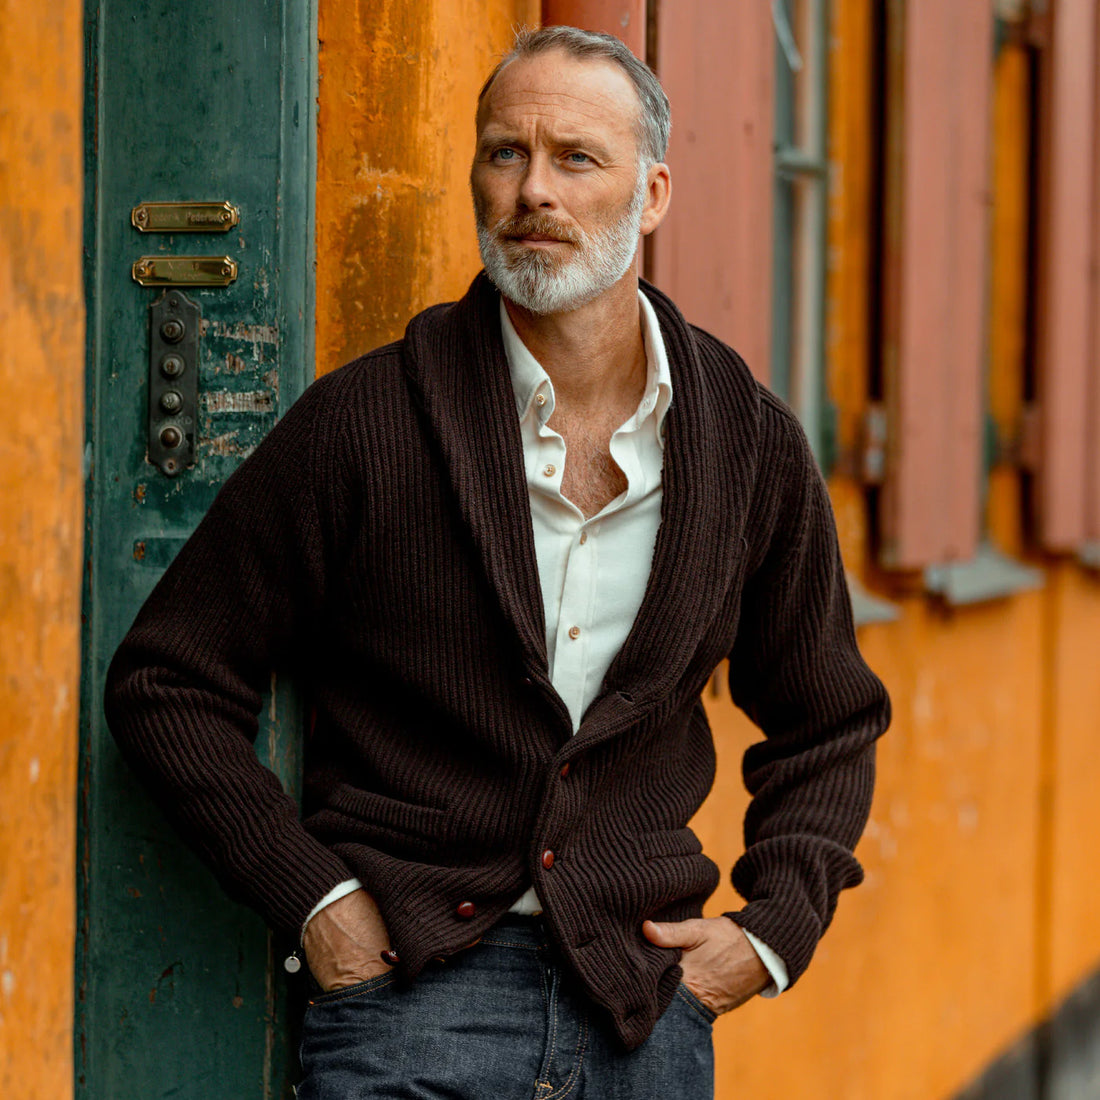 A man with a beard leaning against an orange wall, wearing a dark brown cardigan and a white shirt.